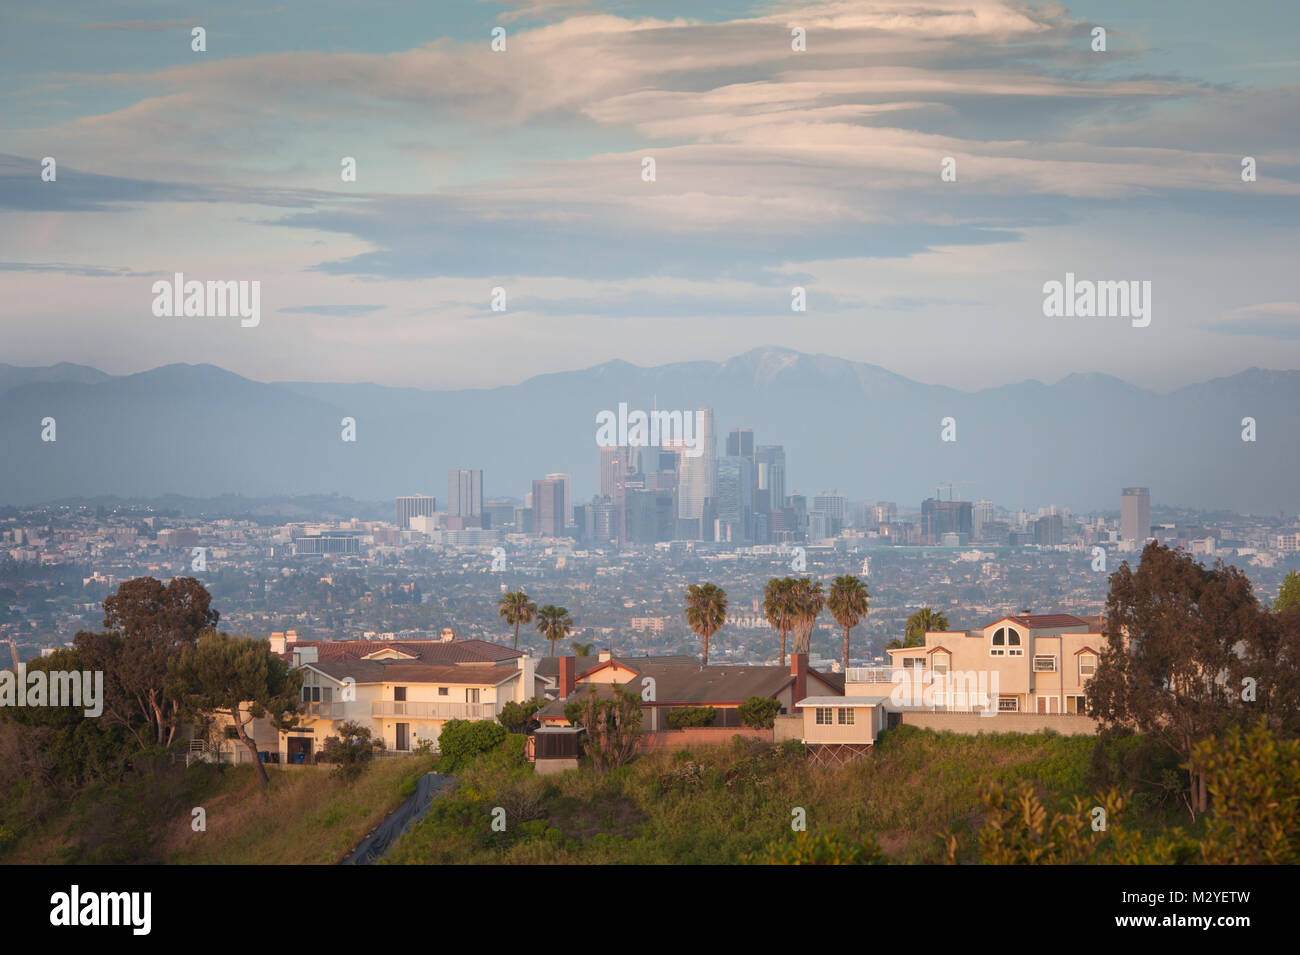 View of Downtown L.A with houses in the foreground photographed at sunset from the top of the Kenneth Hahn State Recreation Area in Los Angeles, CA. Stock Photo